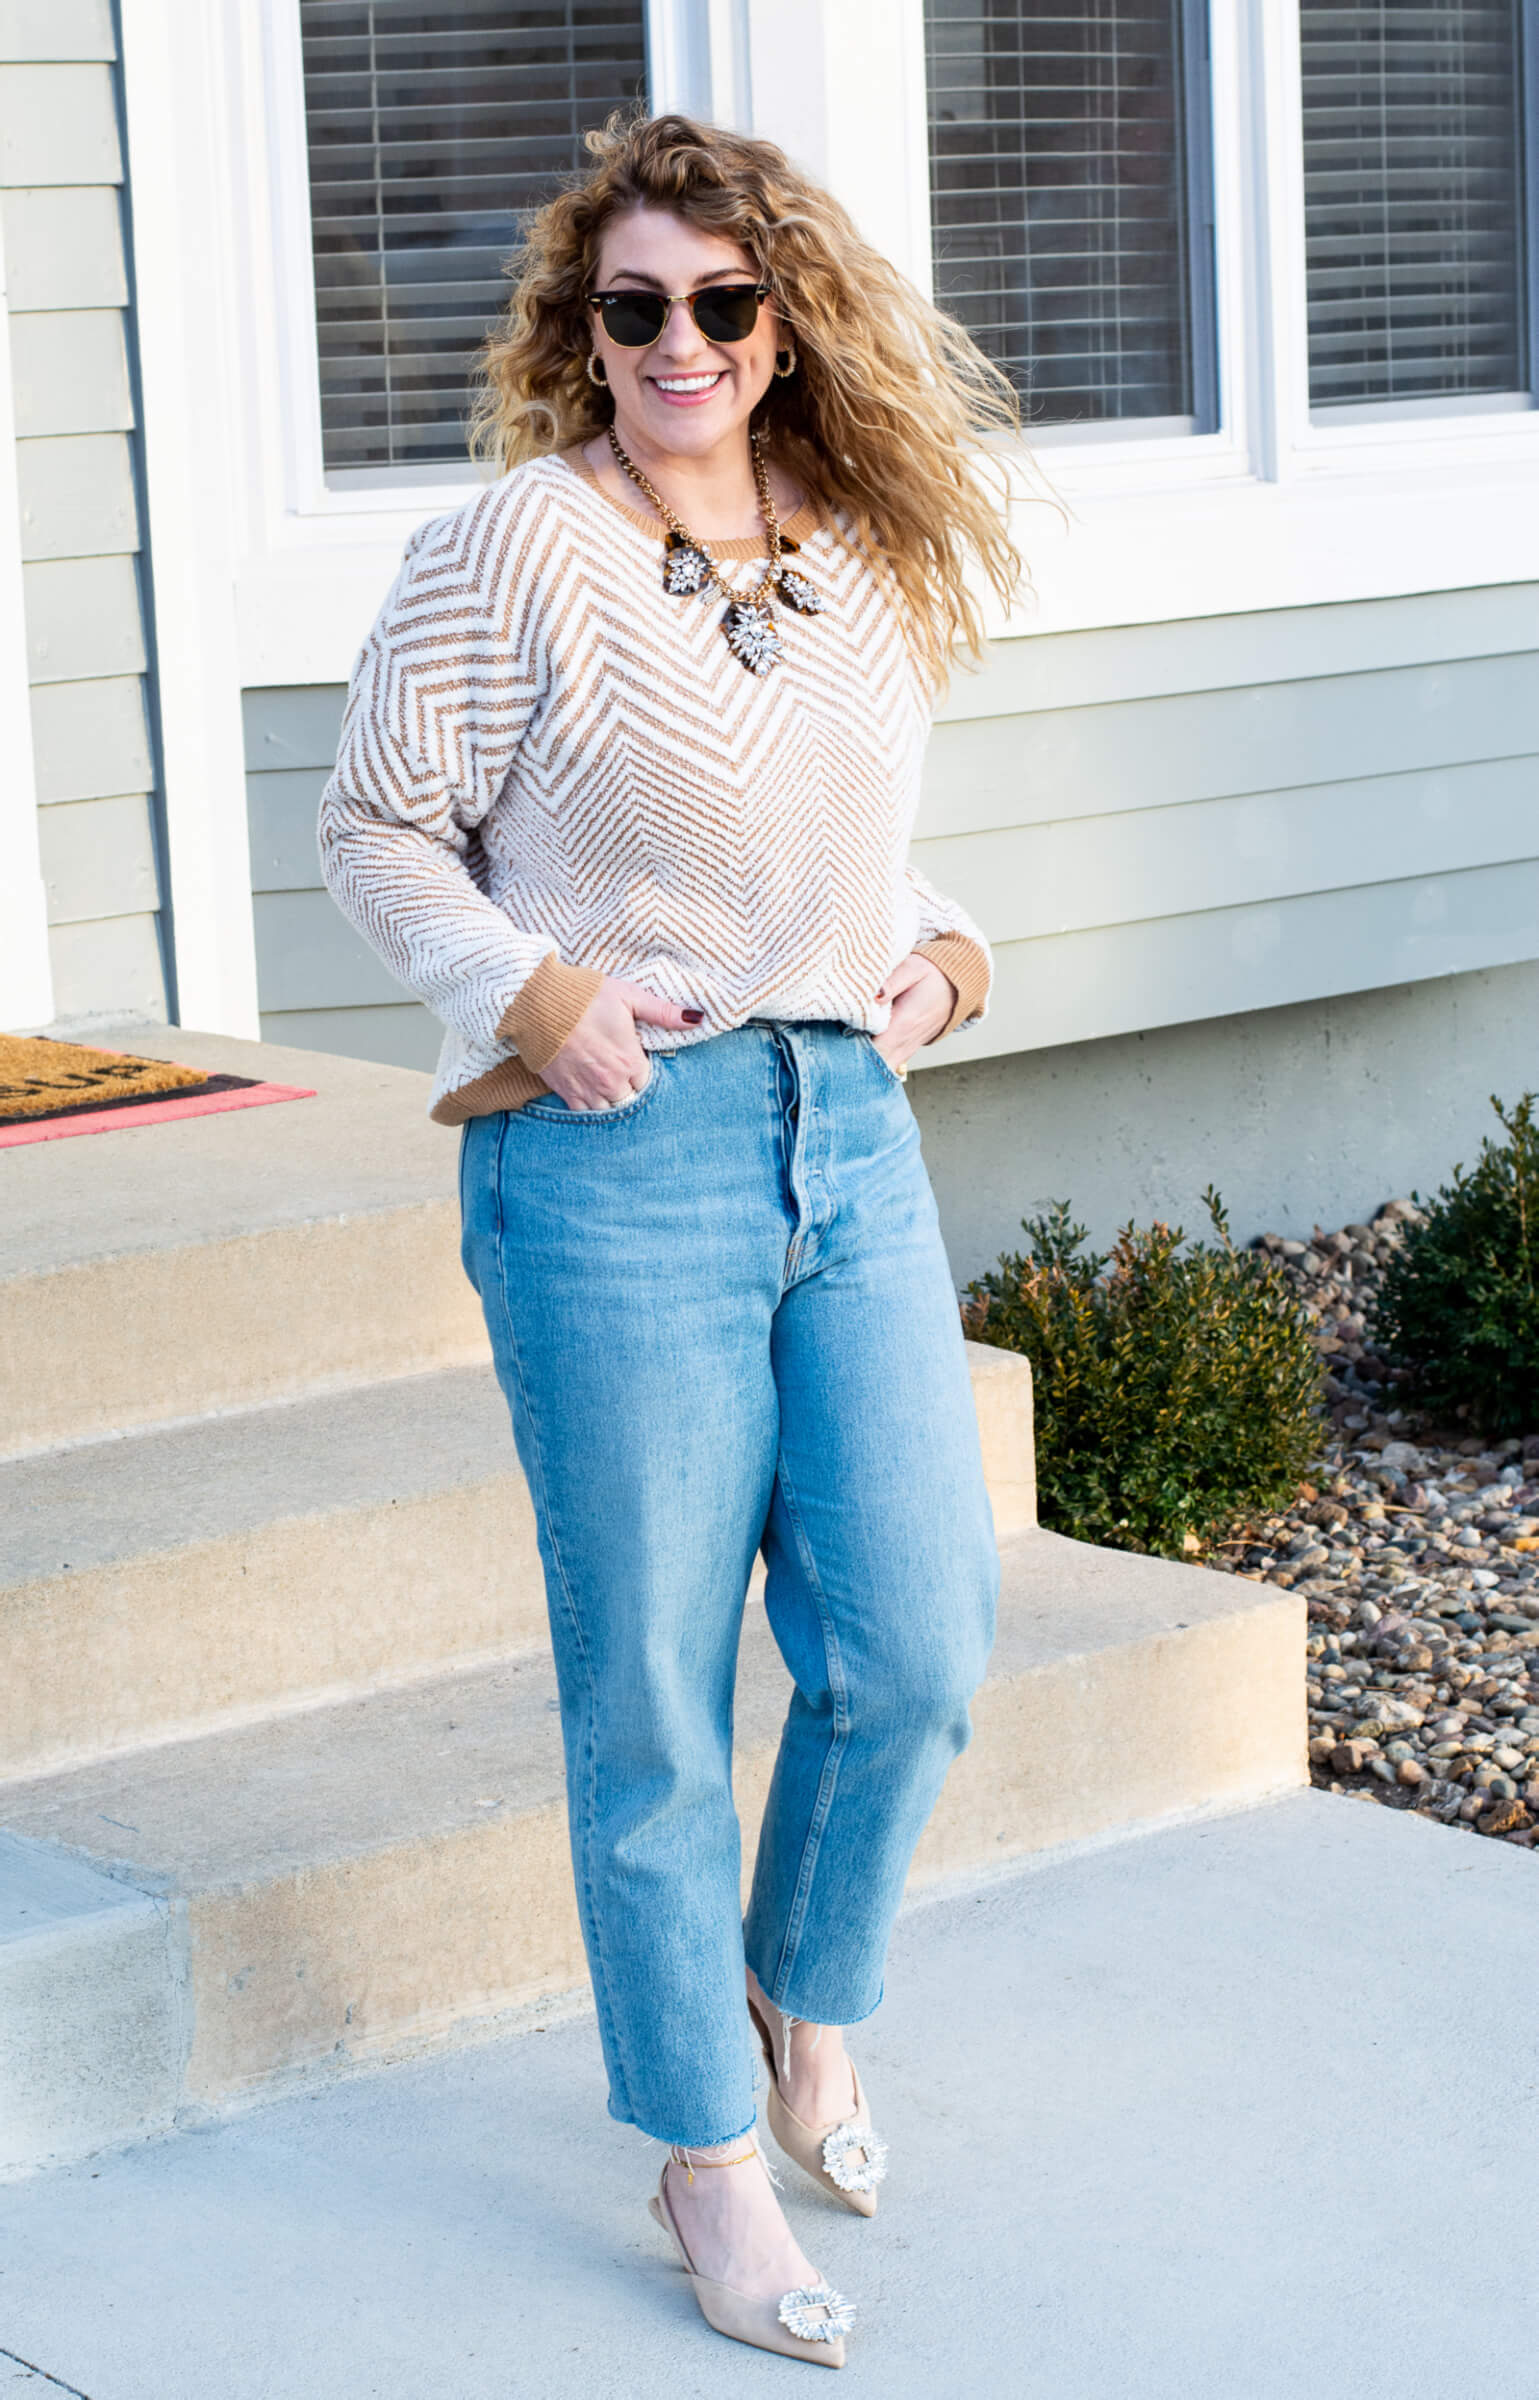 Tan + White Sweater with Slouchy Jeans and Crystal Kitten Heels. | LSR